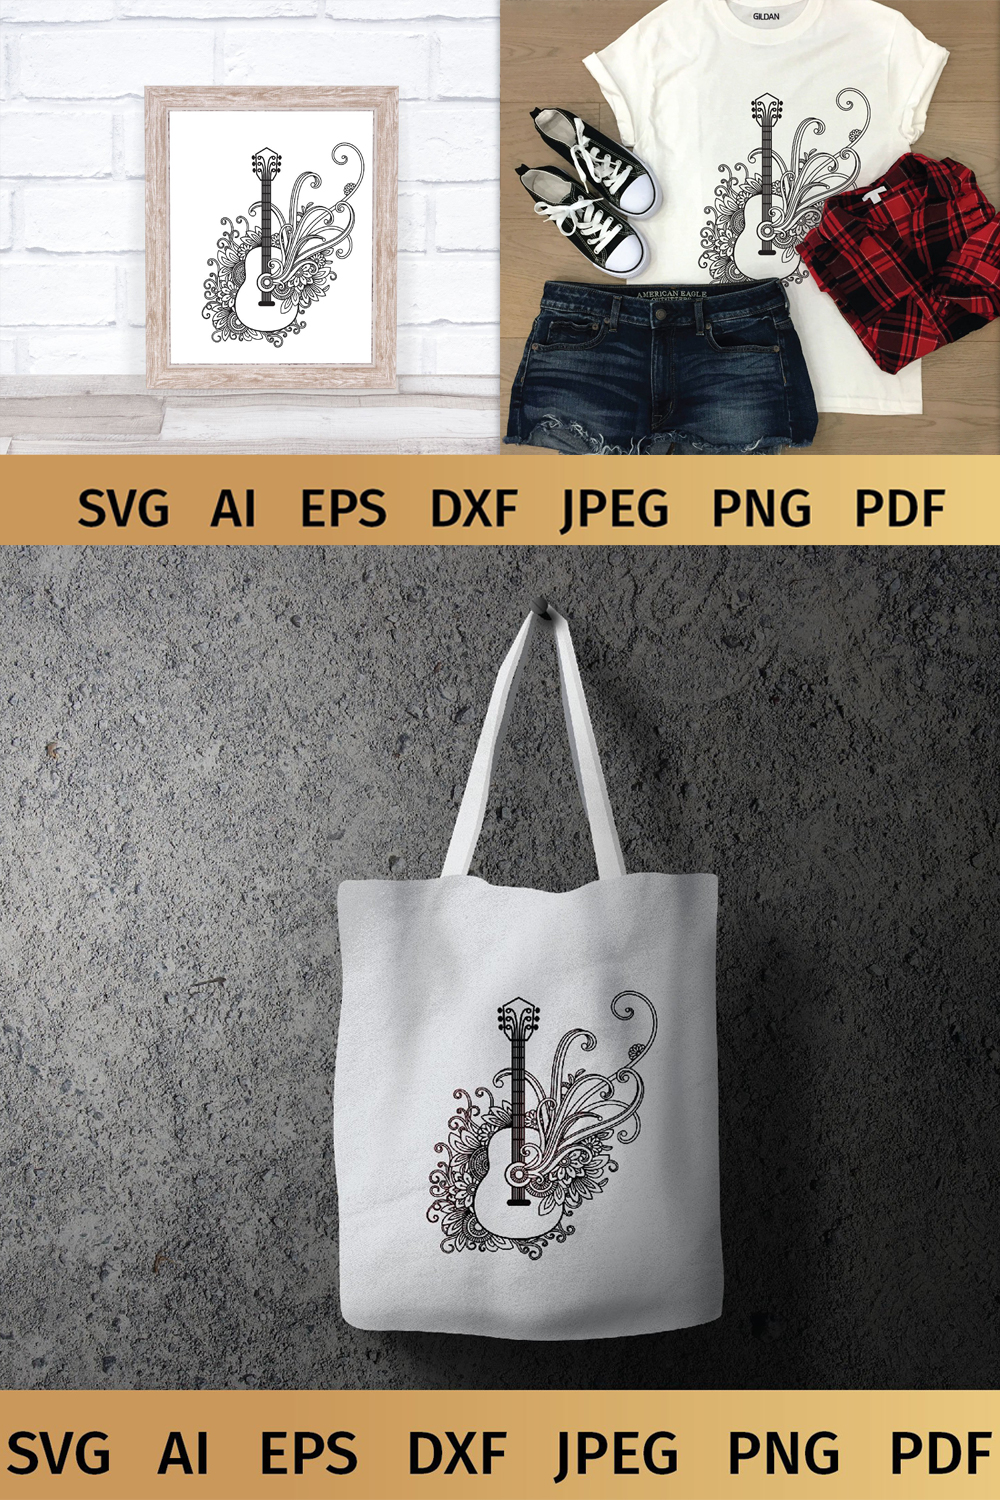 It is possible to use the print on clothes and a bag.